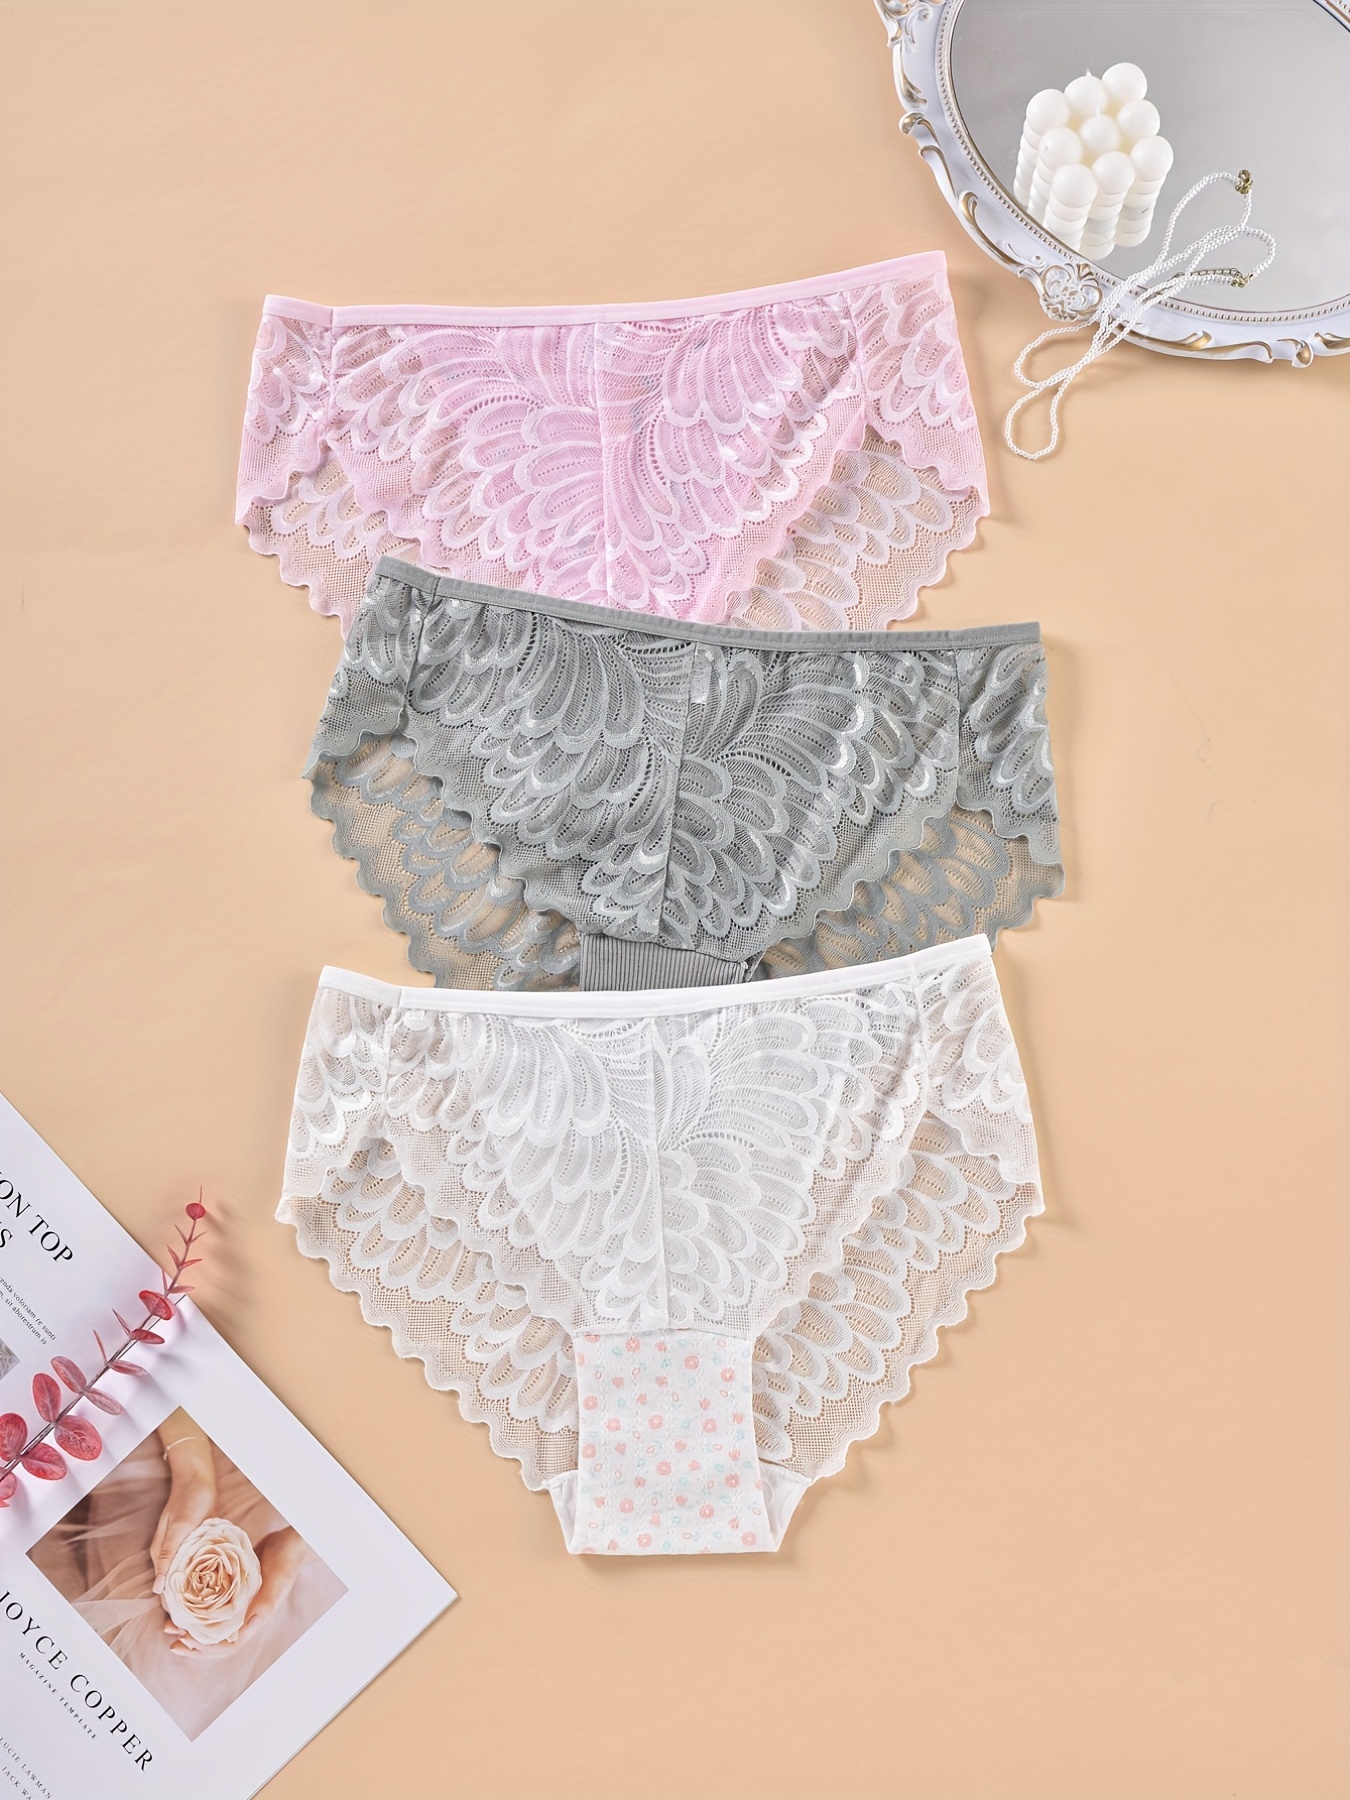 Cheap 3 Pack Woman Sexy Lace Design Knickers Low Waist Briefs Panties  Comfort Pants Underwears